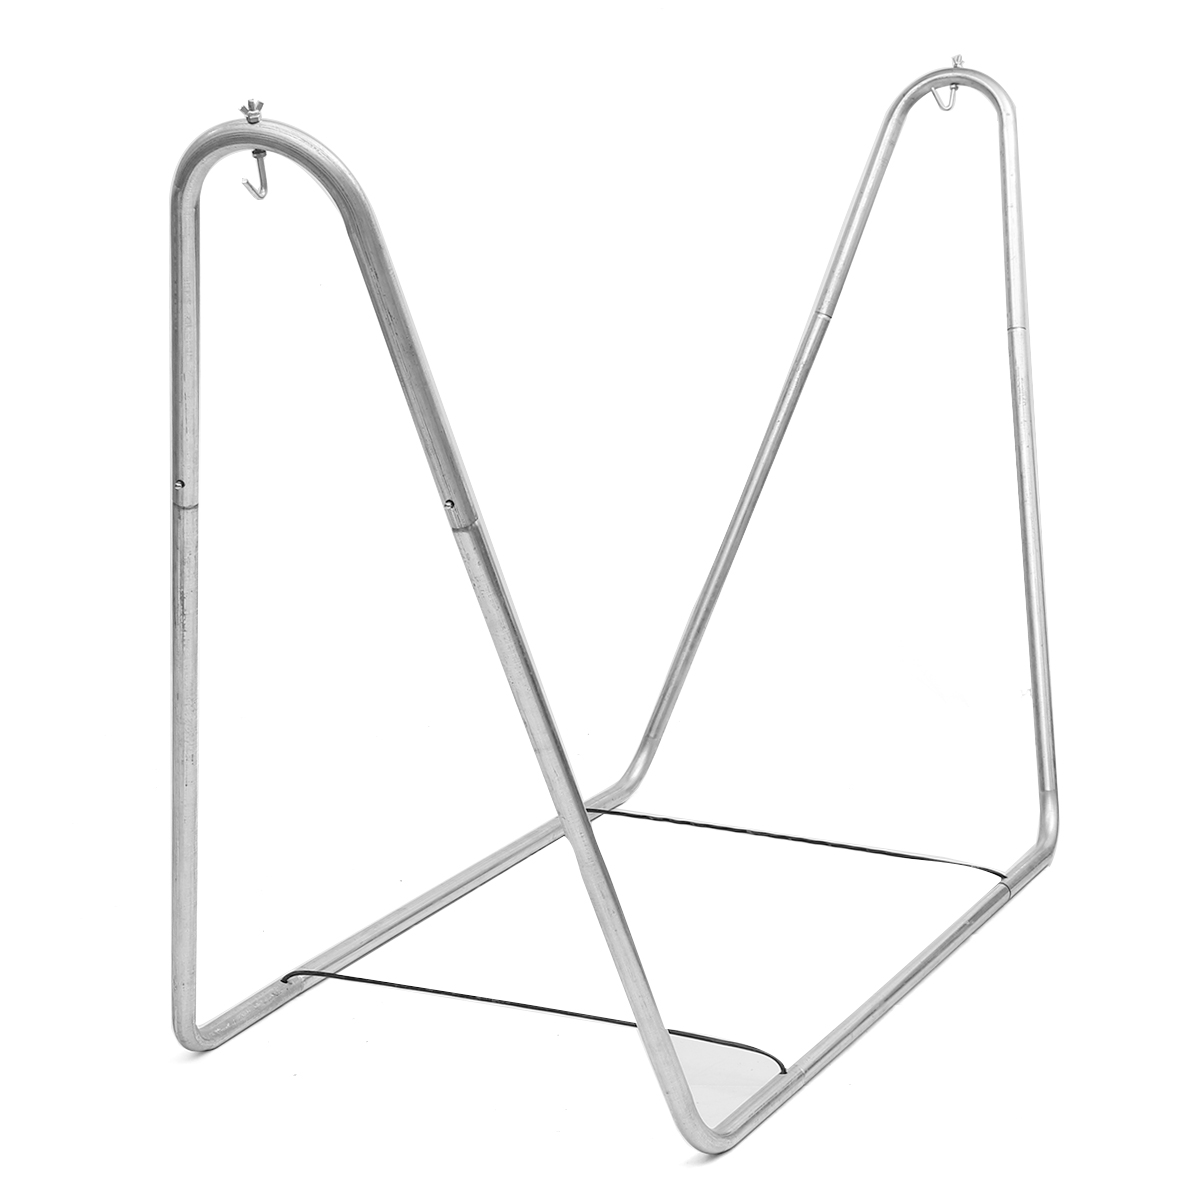 Portable-Large-Garden-Camping-Outdoor-Patio-Hammock-Metal-Frame-Stand-1614717